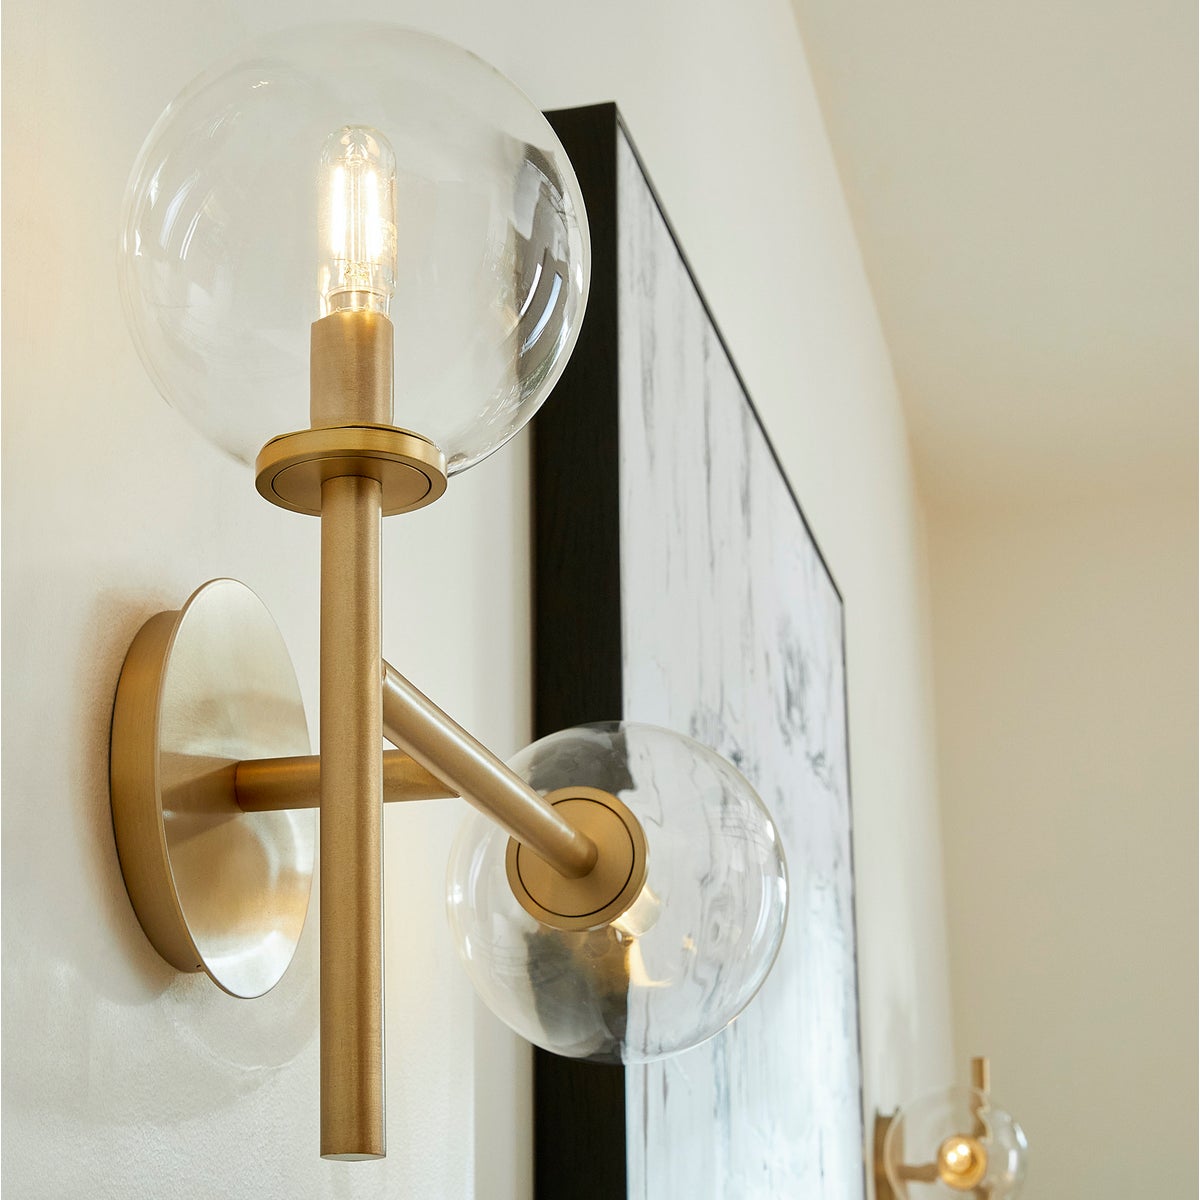 Sputnik Wall Sconce with clear glass domes and aged brass frames, adding mid-century modern appeal. Enhance your space with this Quorum International fixture.